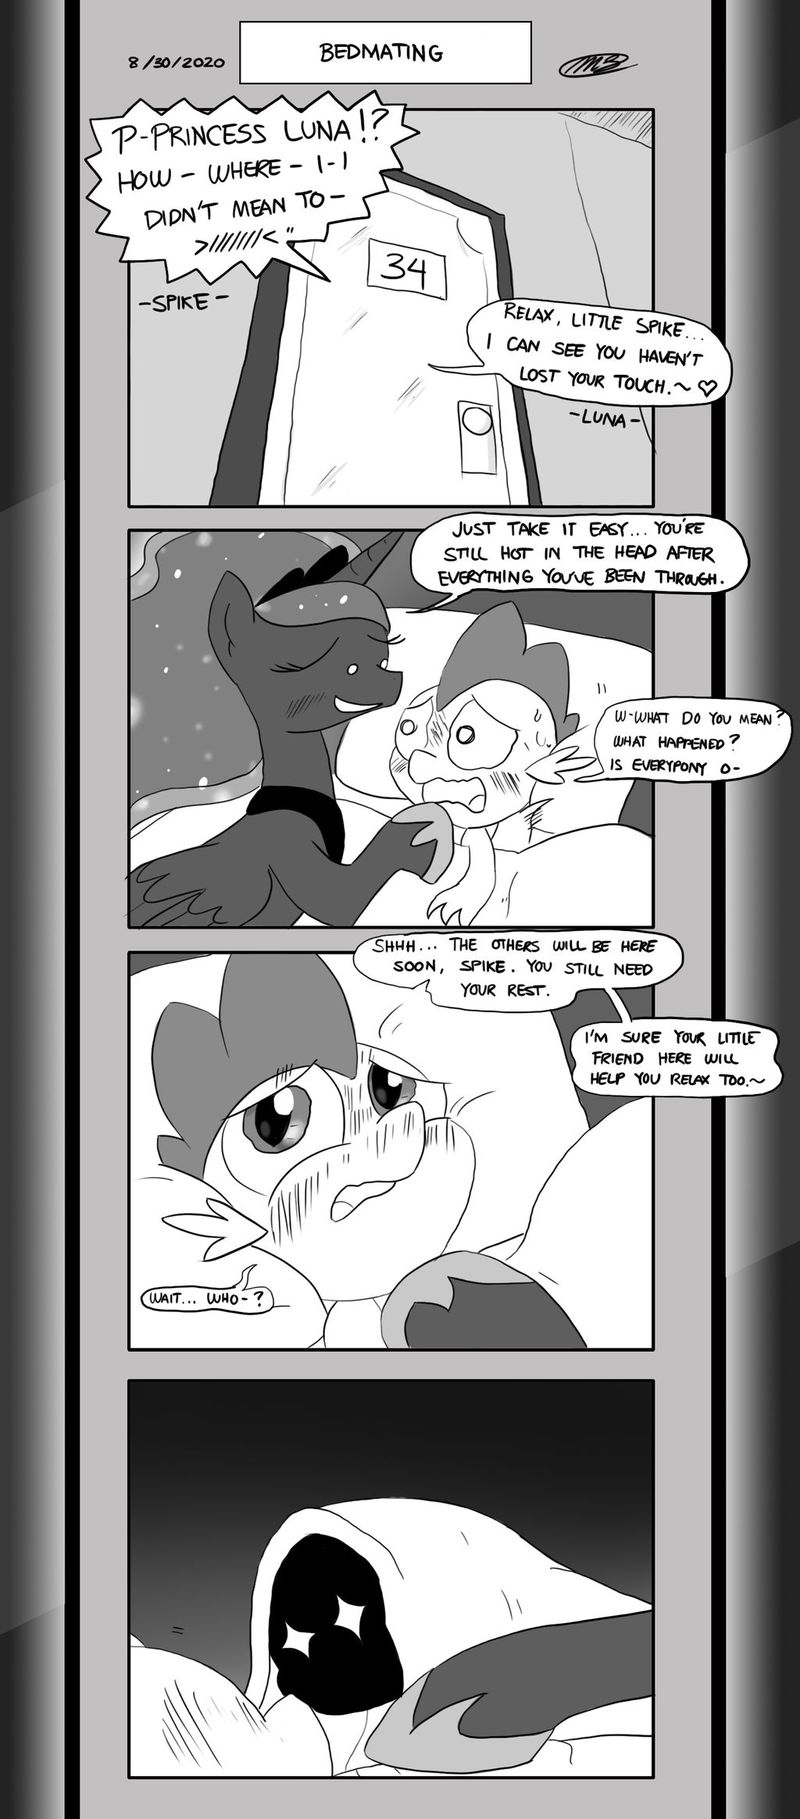 Page 2: Bedmating